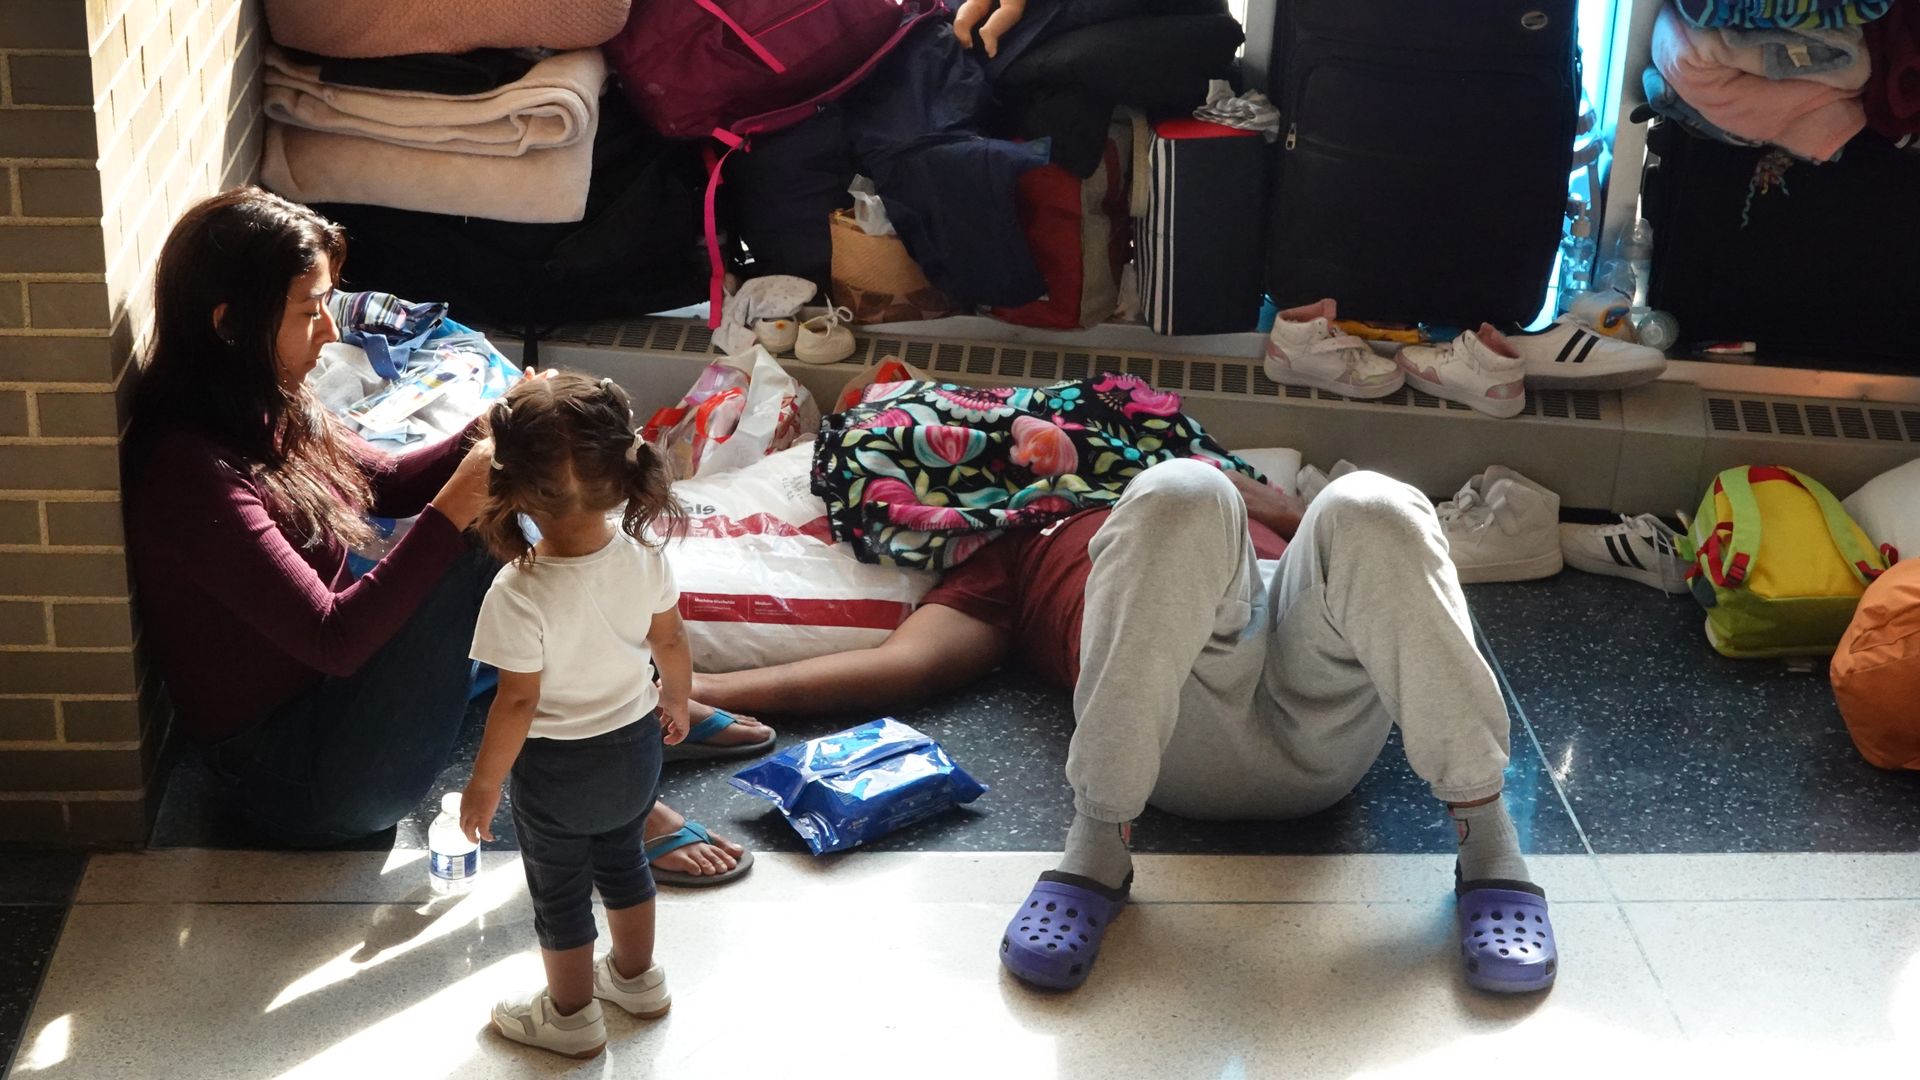 Photo of a migrant family spread out on the floor of a police station